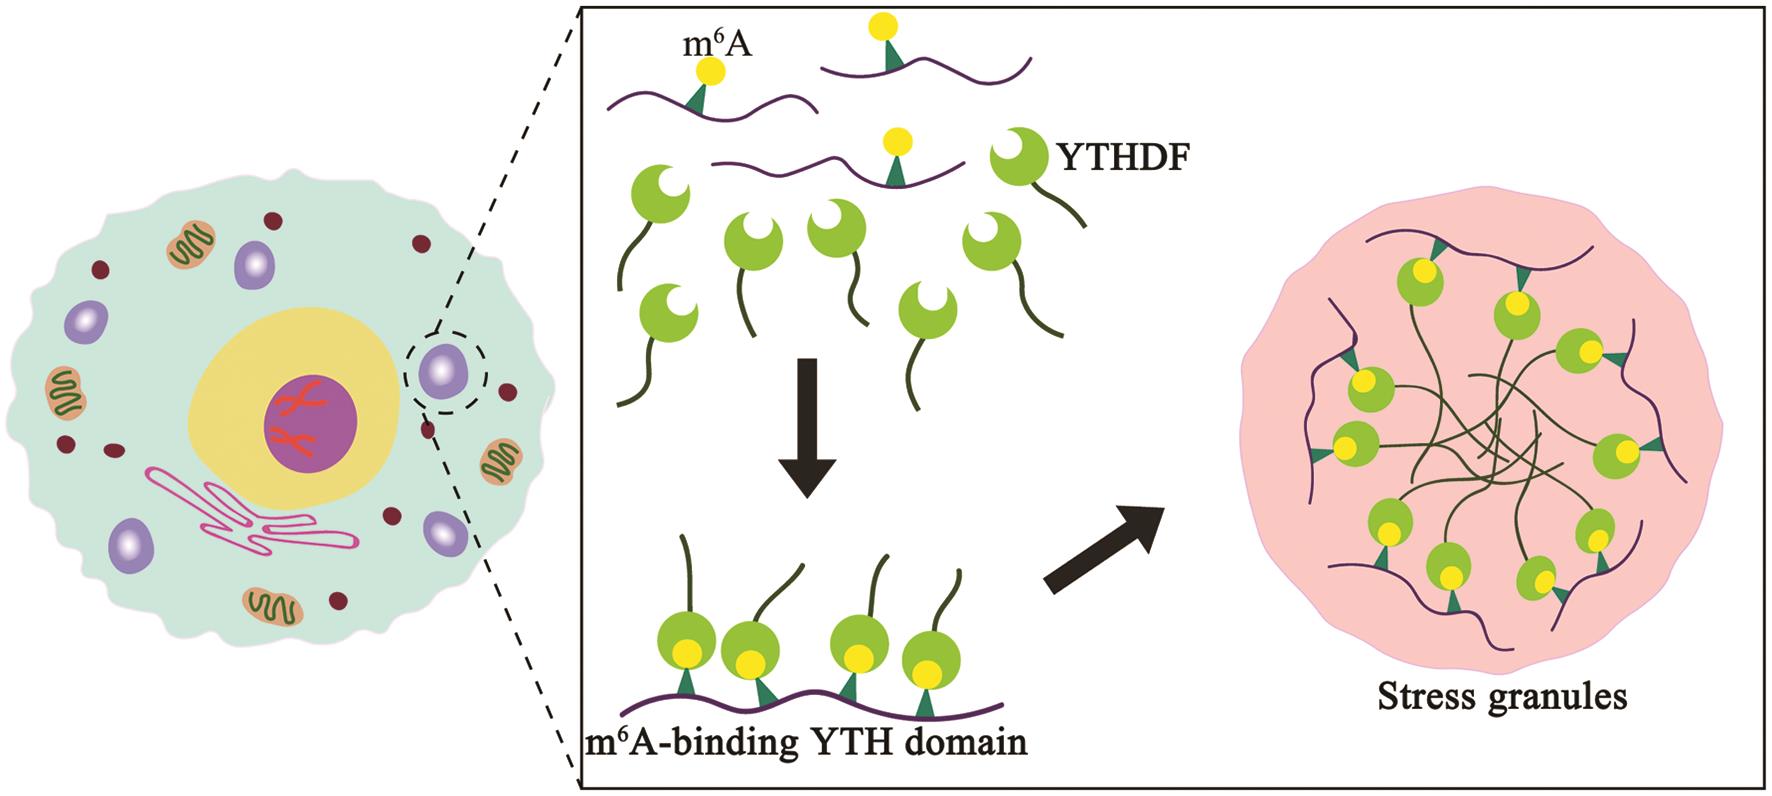 m<sup>6</sup>A is an intermediate linker between mRNA and YTHDF protein, which promotes YTHDF-mediated phase separation.